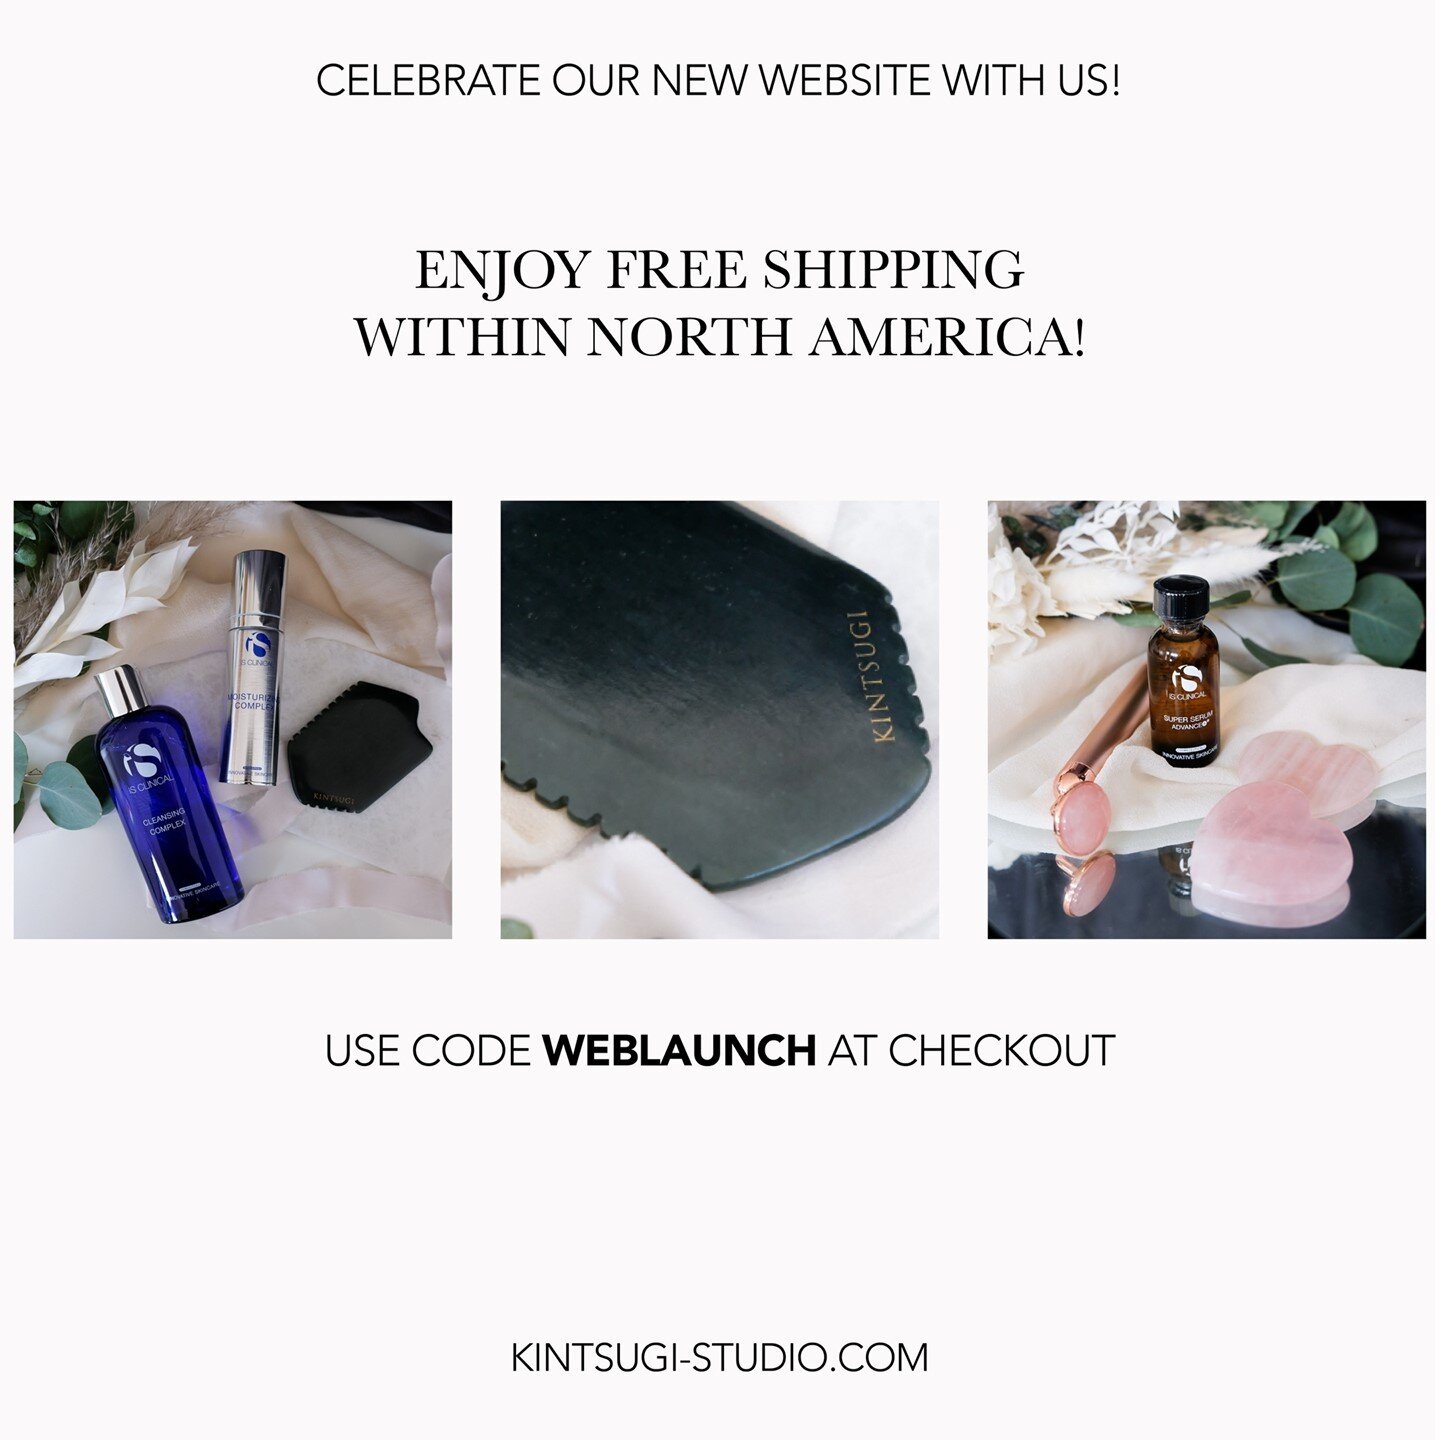 OUR NEW WEBSITE IS FINALLY HERE! 🎉 🎉 🎉 ⁠
⁠
We've been working behind the scenes refreshing our website over the last couple of months to create a website that falls in line with the Kintsugi Studio brand and also providing ease of use for YOU. ⁠
⁠